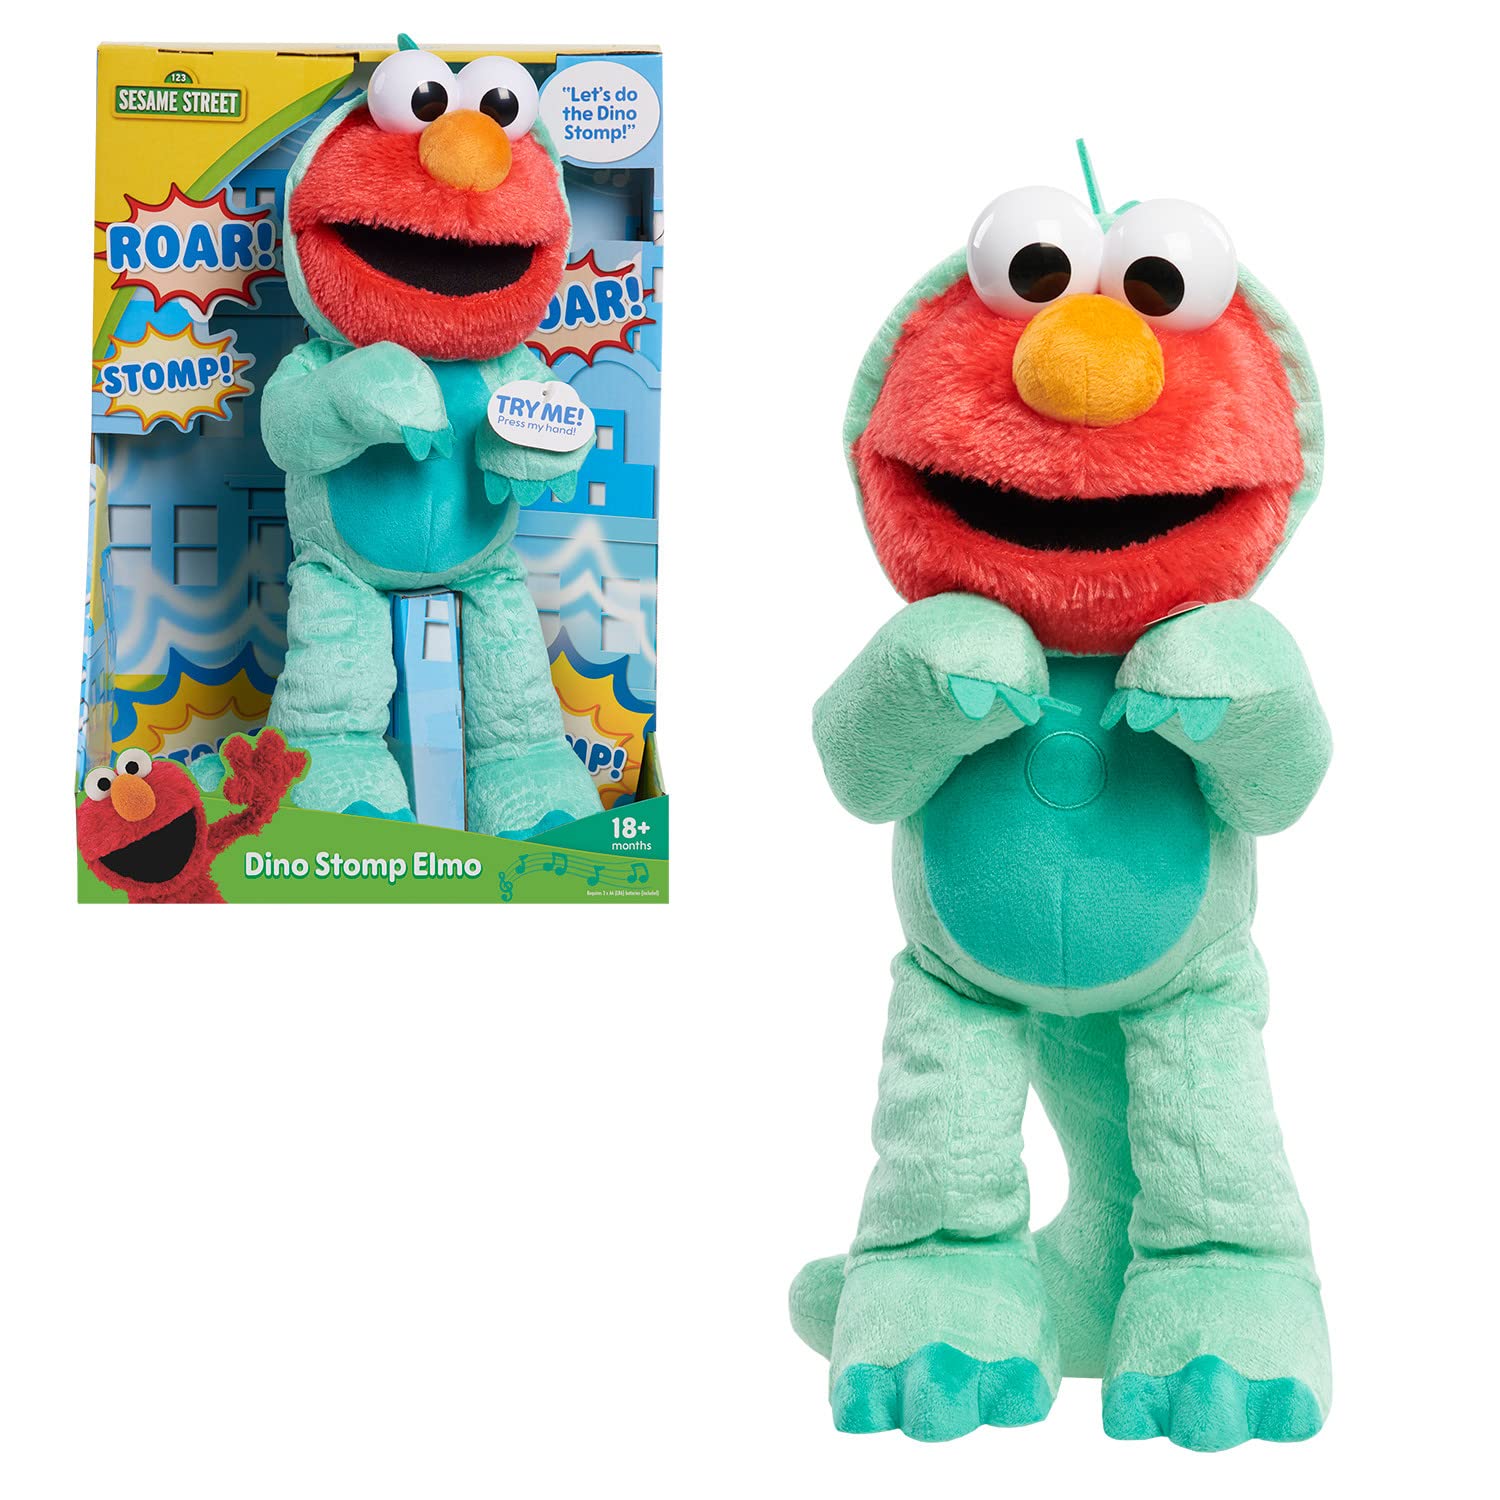 Sesame Street Dino Stomp Elmo 13-Inch Plush Stuffed Animal Sings and Dances, Officially Licensed Kids Toys for Ages 18 Month, Gifts and Presents by Just Play